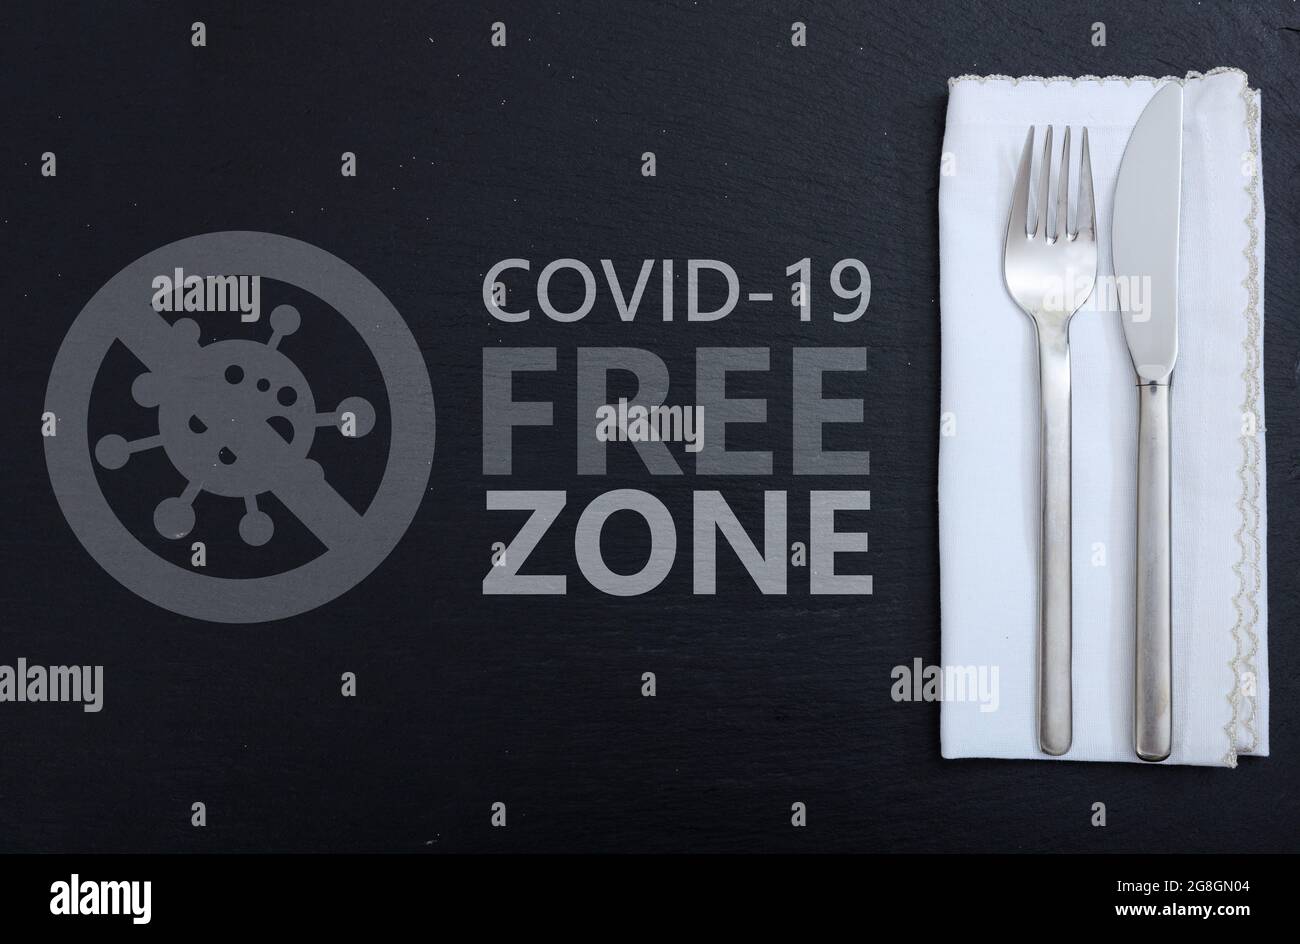 Covid free zone sign. COVID 19 FREE ZONE text label on dinner table setting background. Restaurant disinfected areas, vaccinated only concept Stock Photo